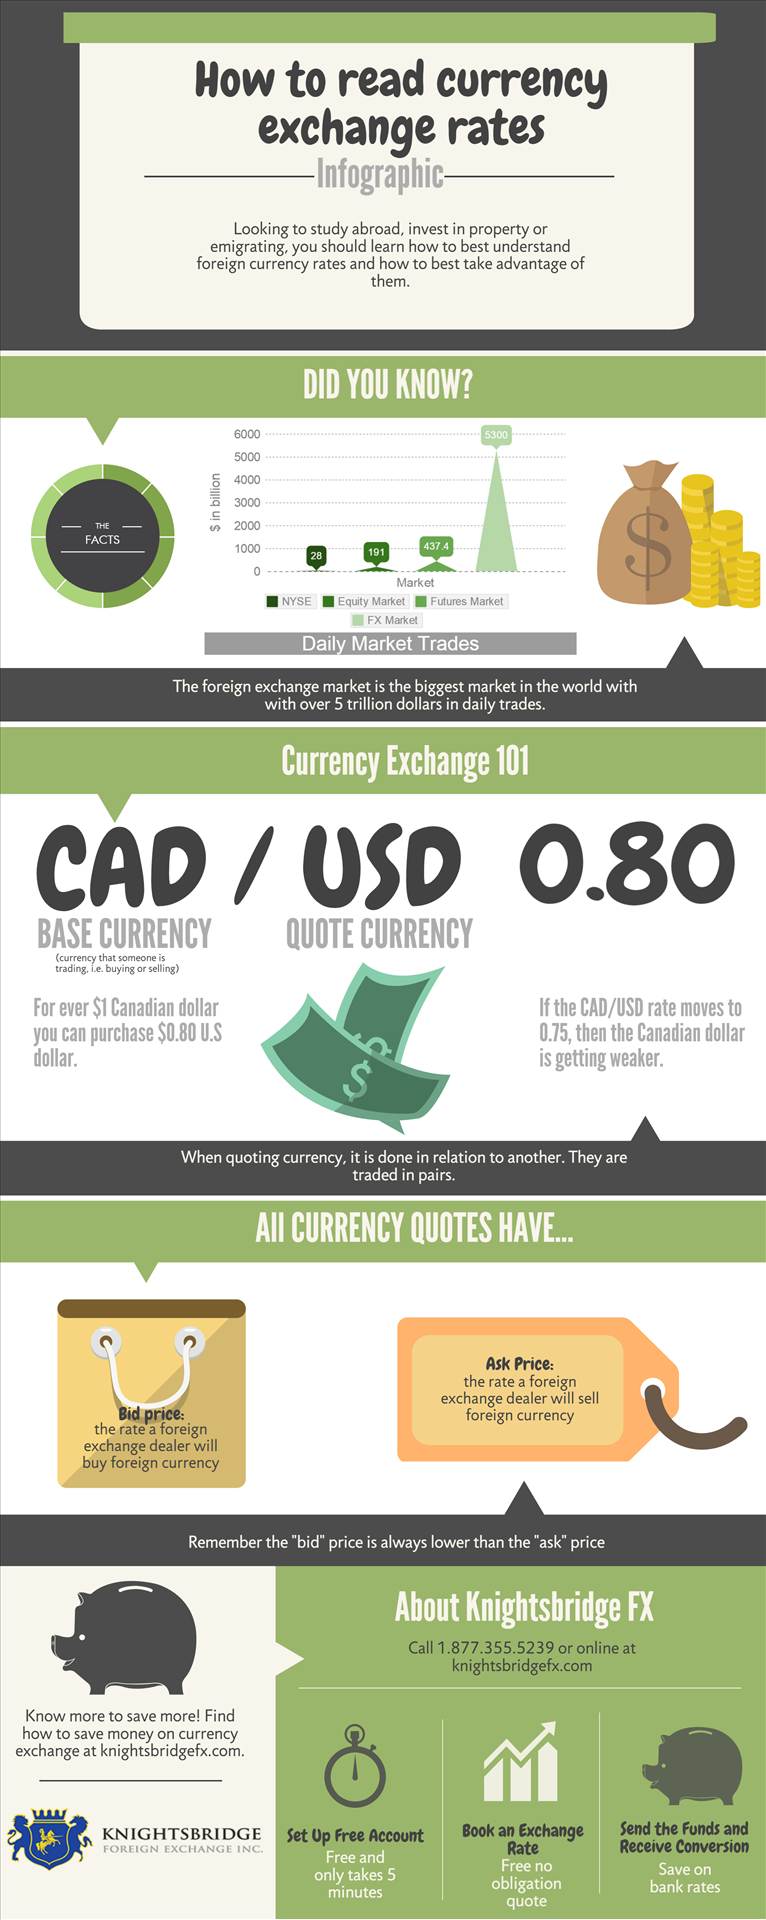 How to read currency exchange rates Knightsbridge Foreign Exchange
100 King Street West, Suite 5700
Toronto, Ontario, M5X 1C7
(416) 479-0834
http://www.knightsbridgefx.com





 by KnightsbridgeFX